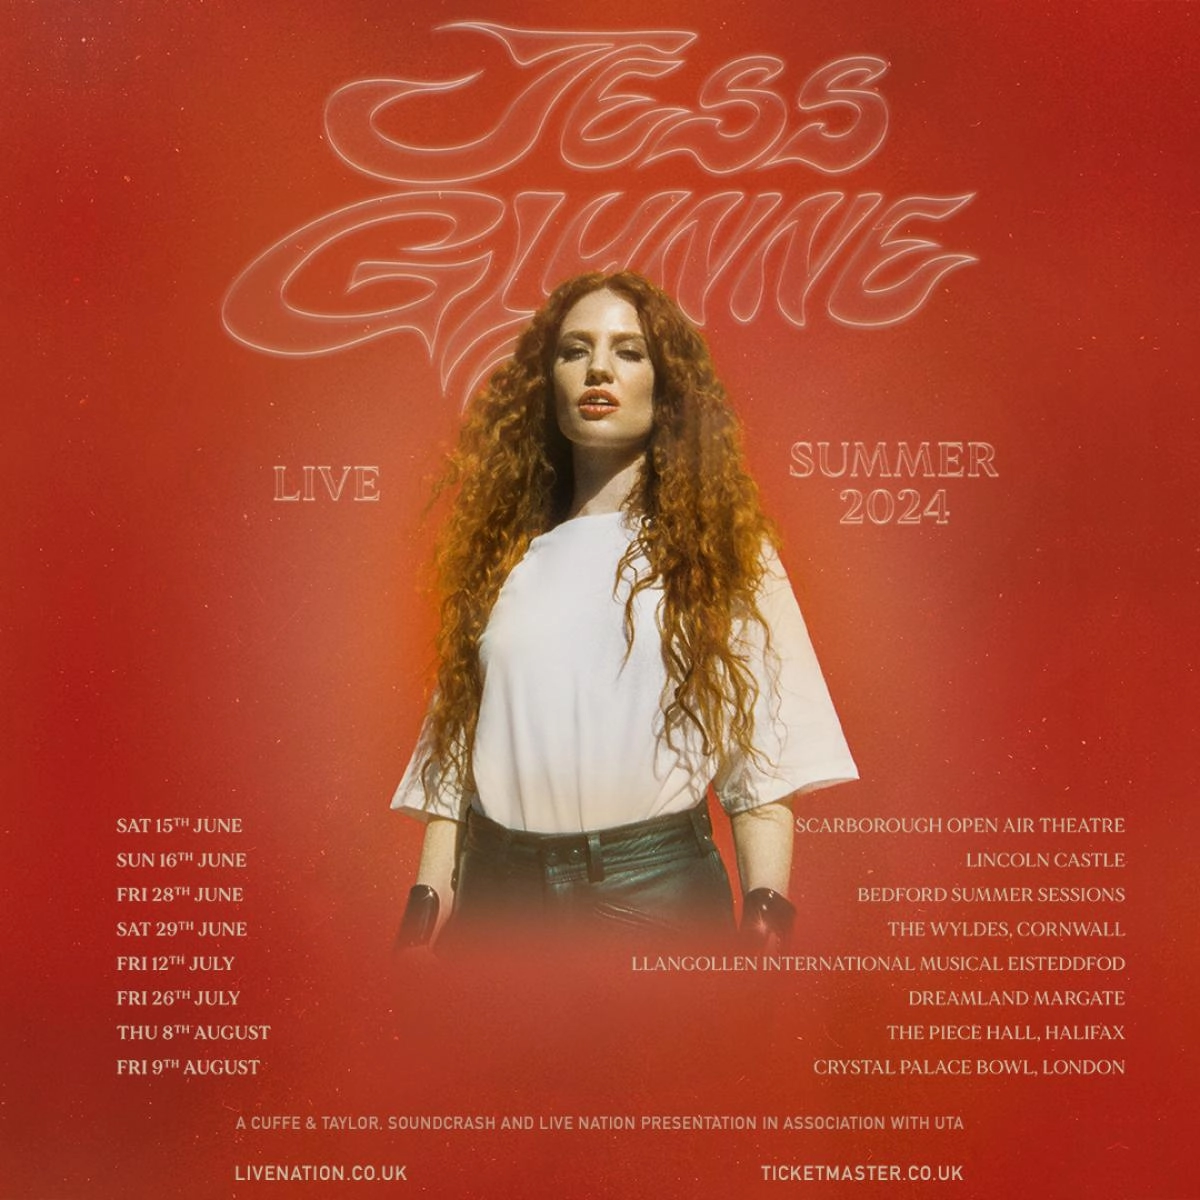 Jess Glynne - Live at The Piece Hall Halifax Tickets